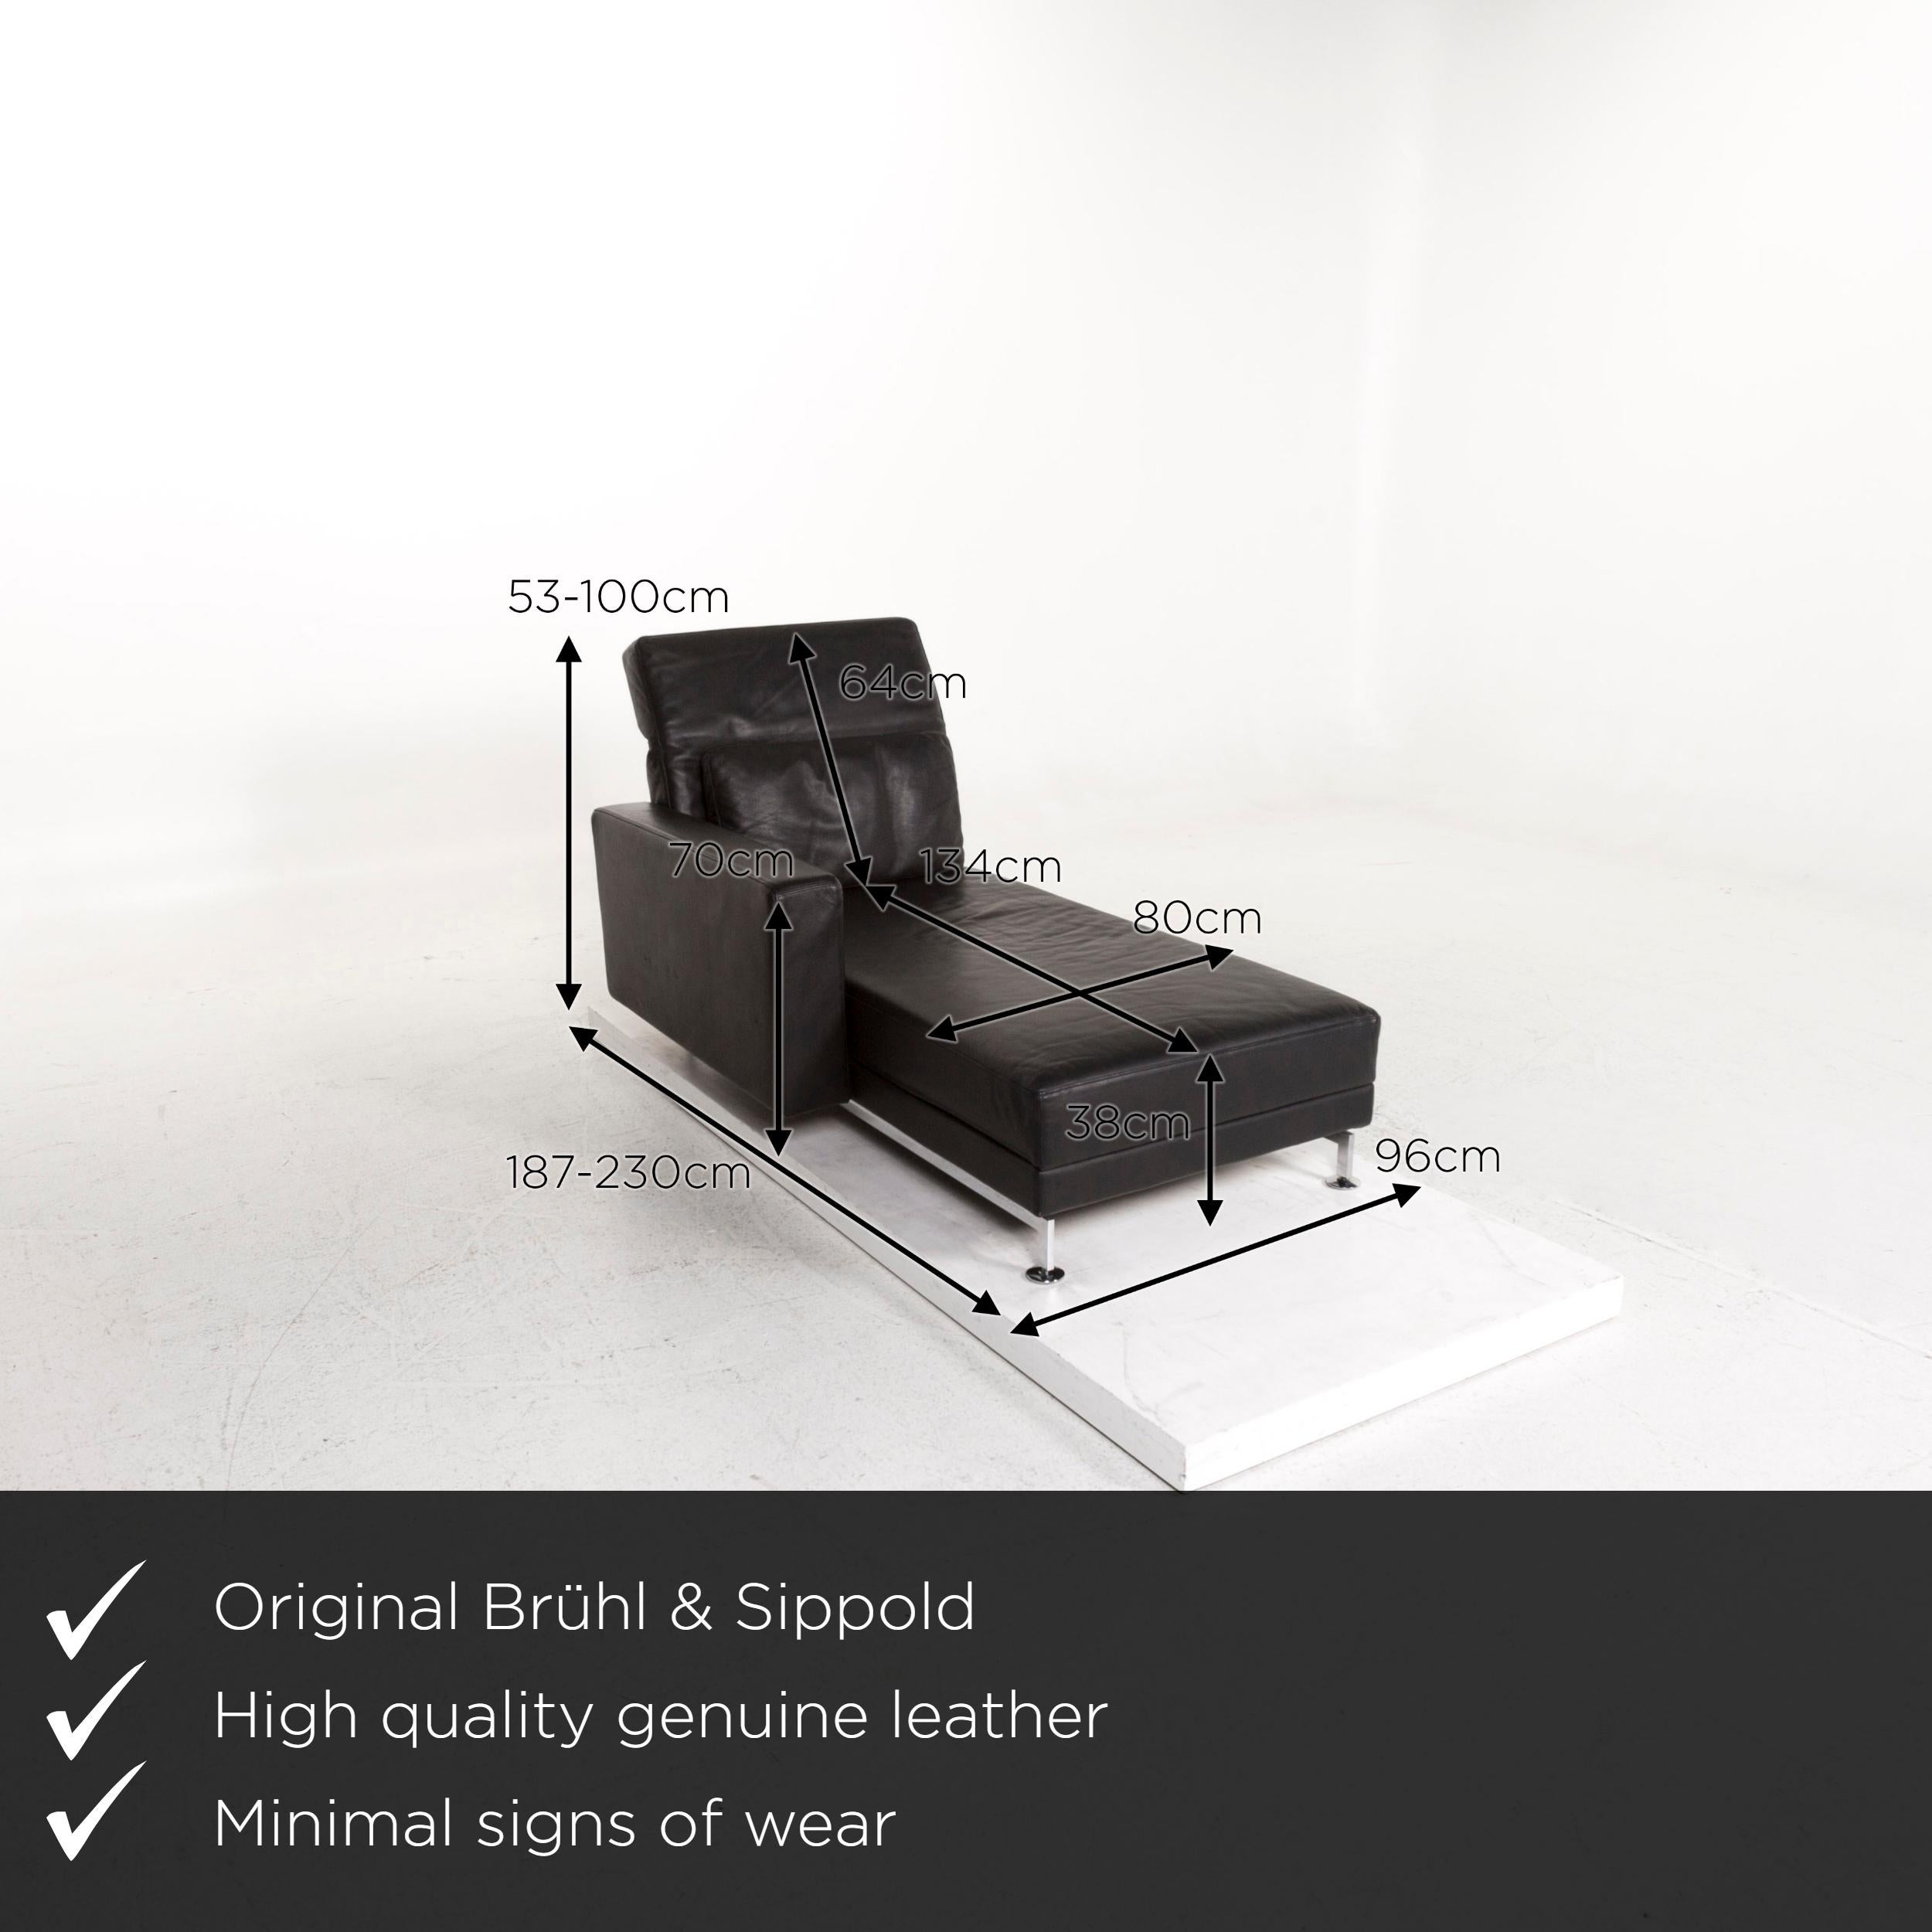 We present to you a Brühl & Sippold Moule leather lounger black function relax function.
    
 

 Product measurements in centimeters:
 

Depth 187
Width 96
Height 100
Seat height 38
Rest height 70
Seat depth 134
Seat width 80
Back